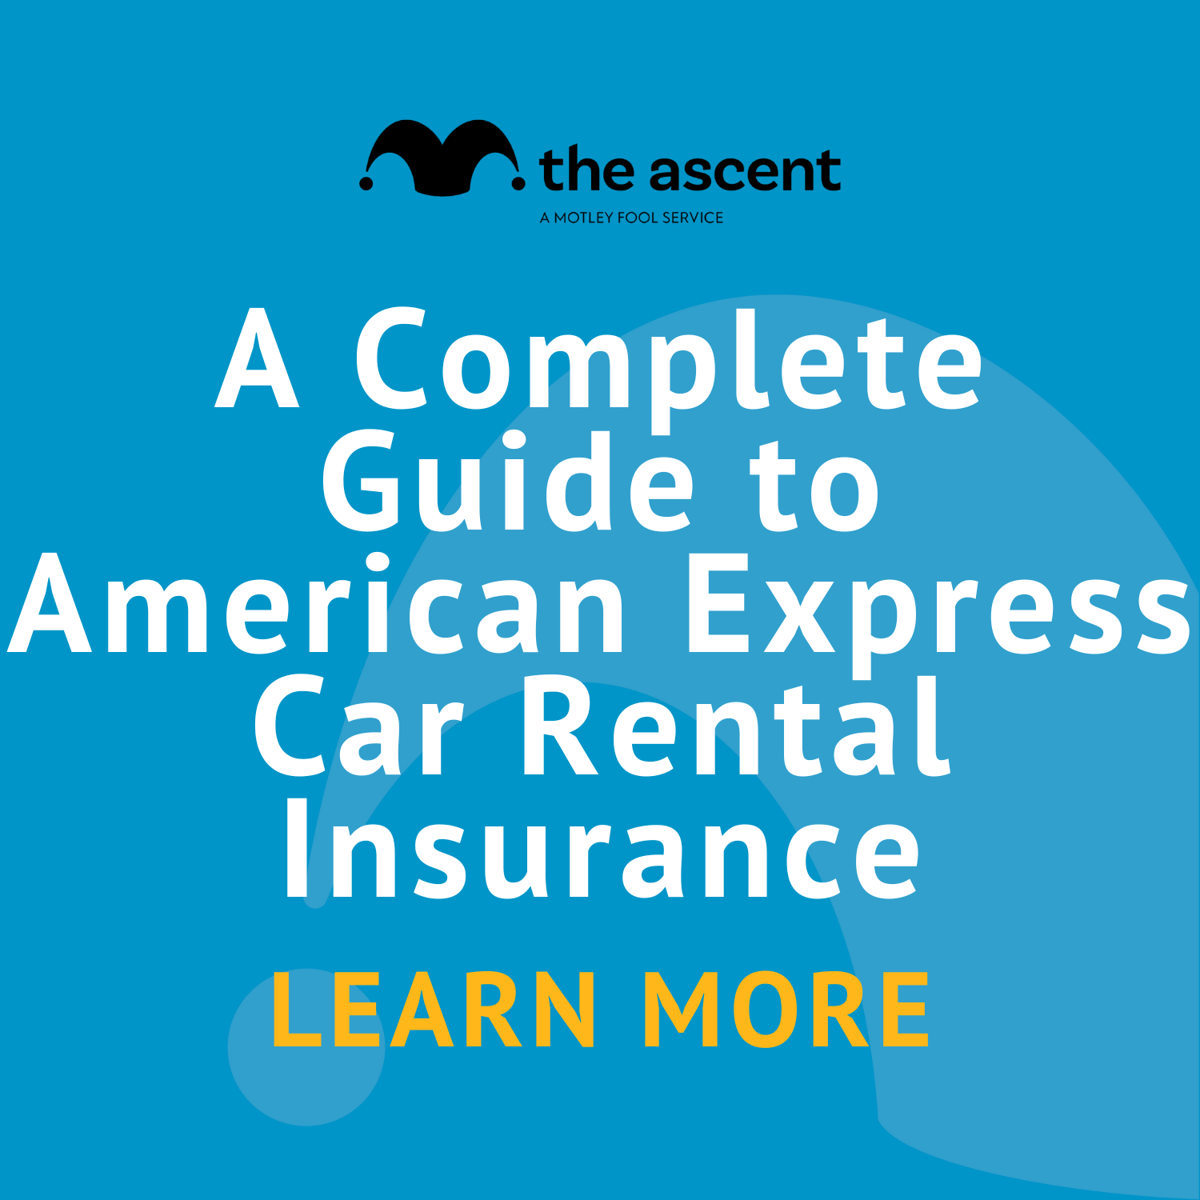 American Express Car Rental Insurance | The Ascent